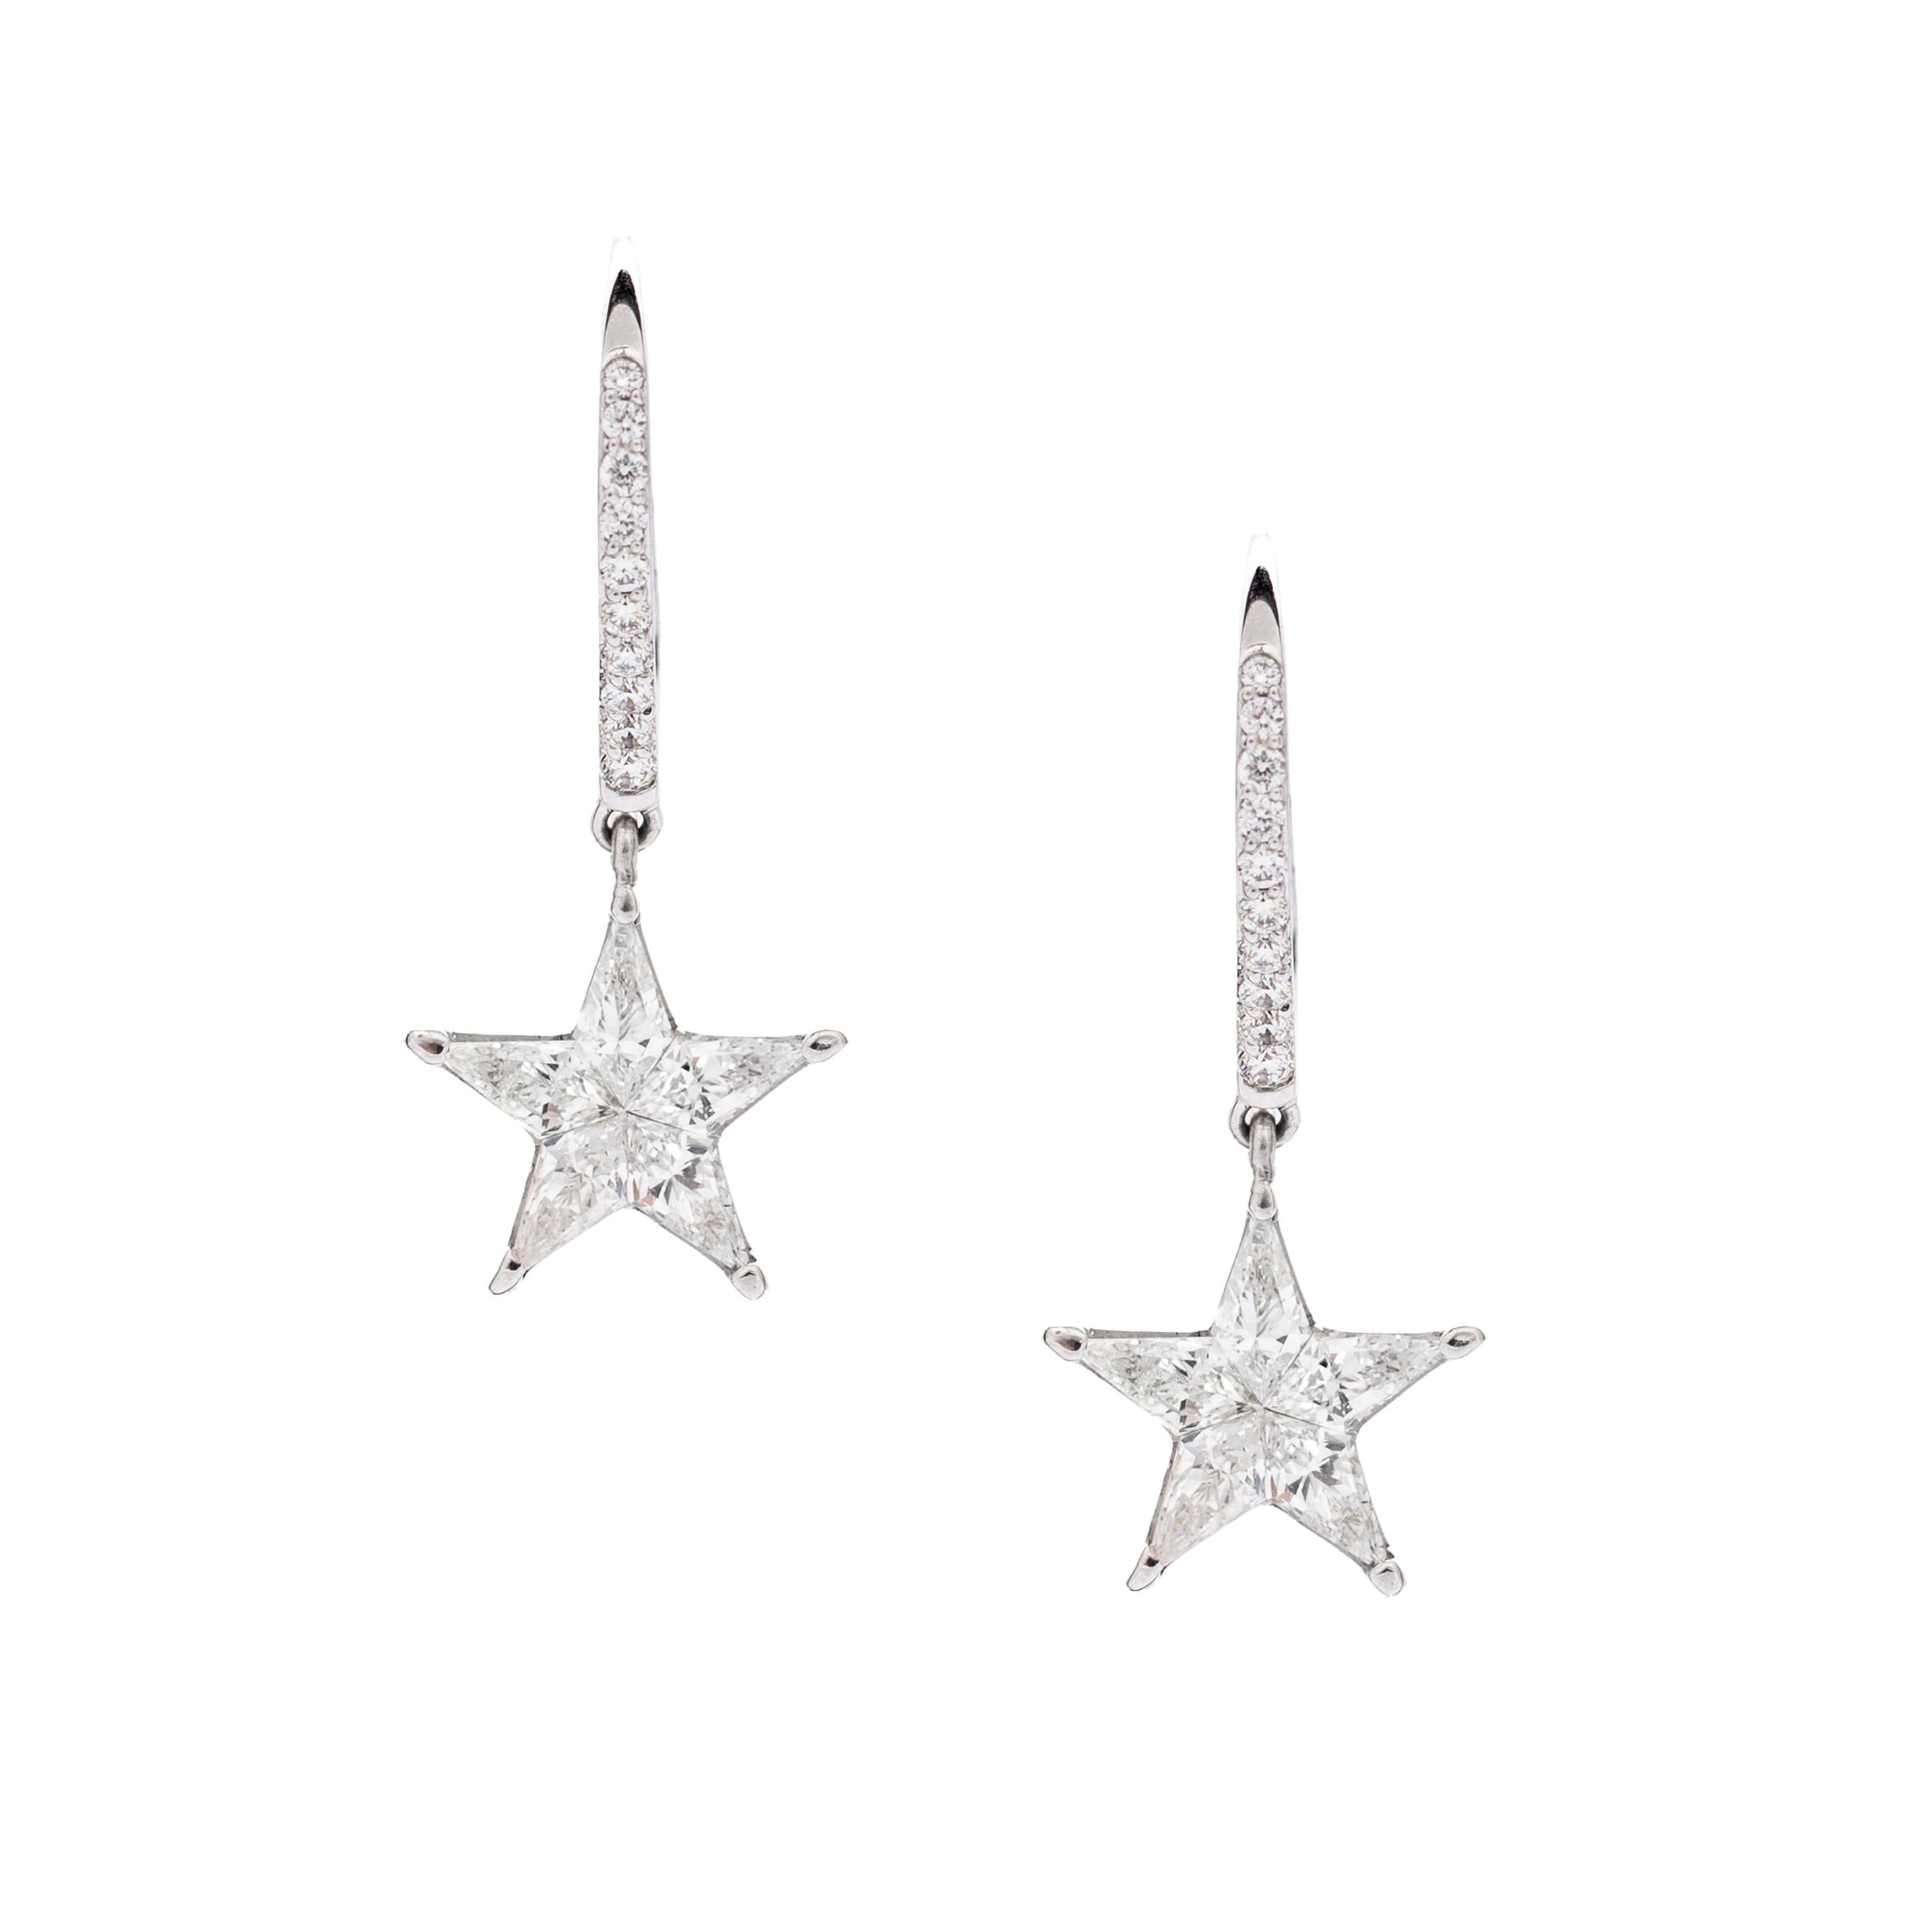 Earring in 18kt white gold set with 10 stars diamonds 1.63 cts and 20 diamonds 0.18 cts.       